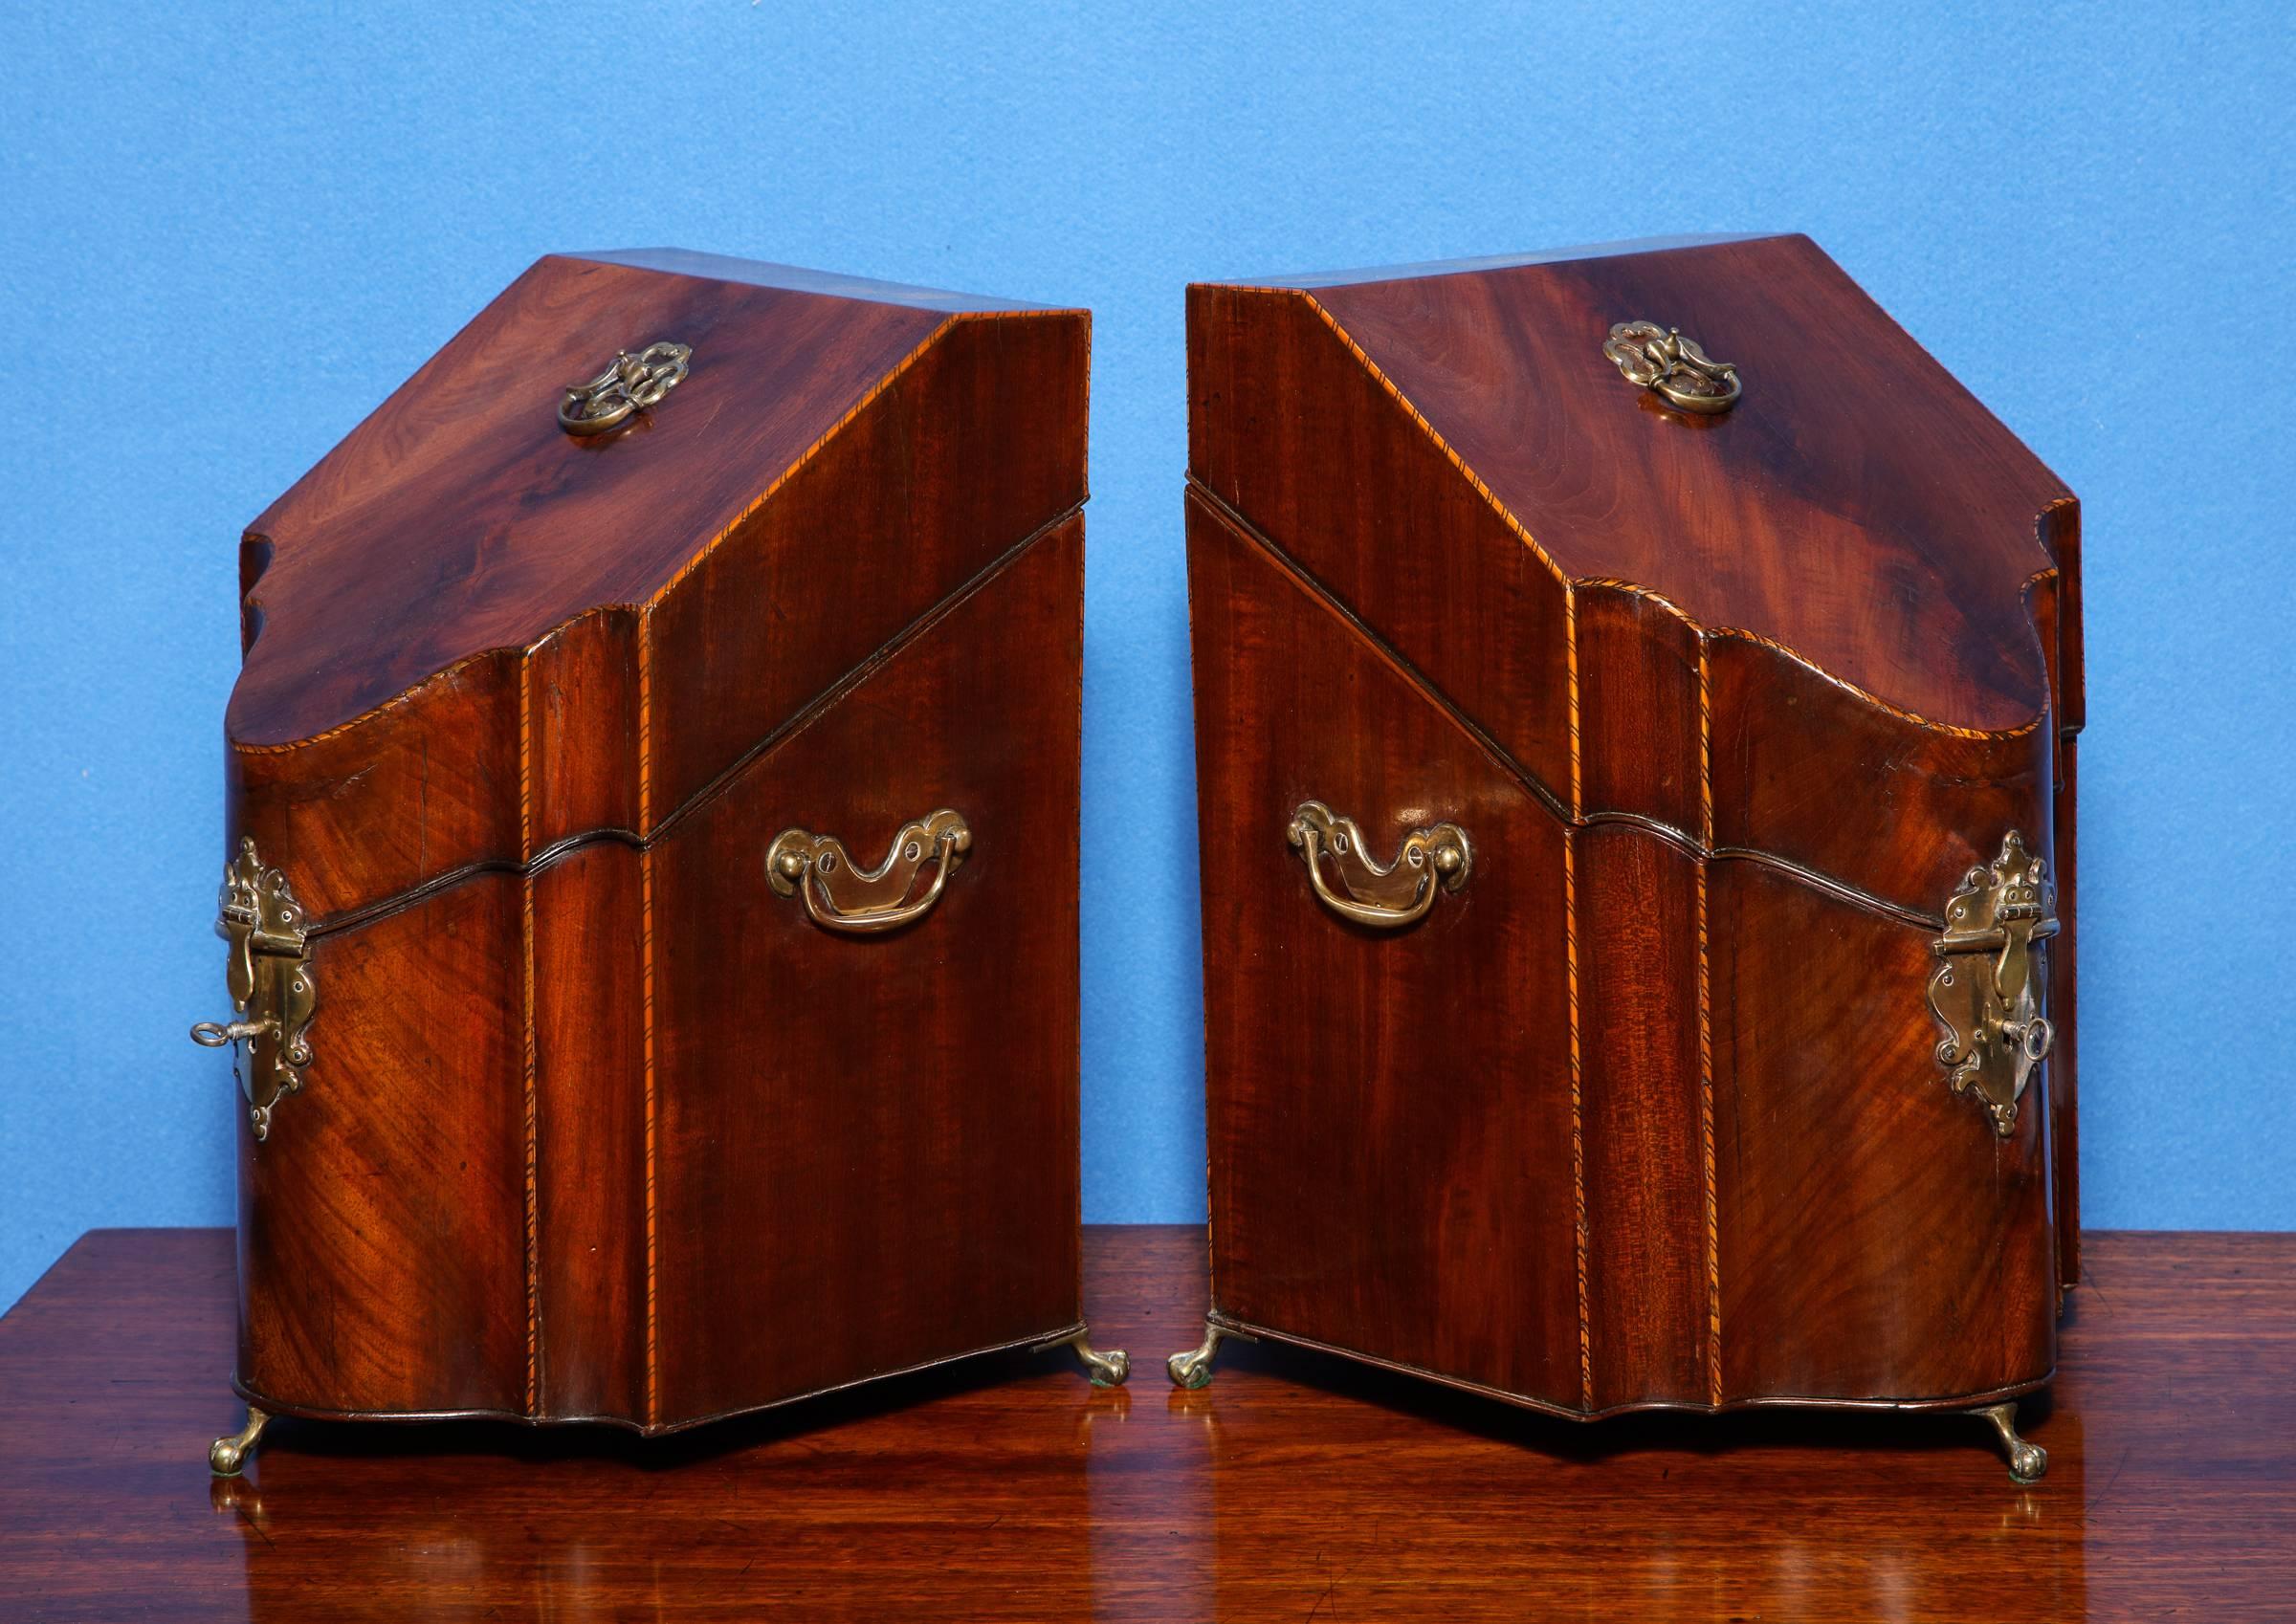 Fine pair of George III period serpentine mahogany knife boxes, with checkered stringing and original brass handles and elaborate escutcheons and ring handles, and having brass ball and claw feet. The hinged top opening to interiors fitted for